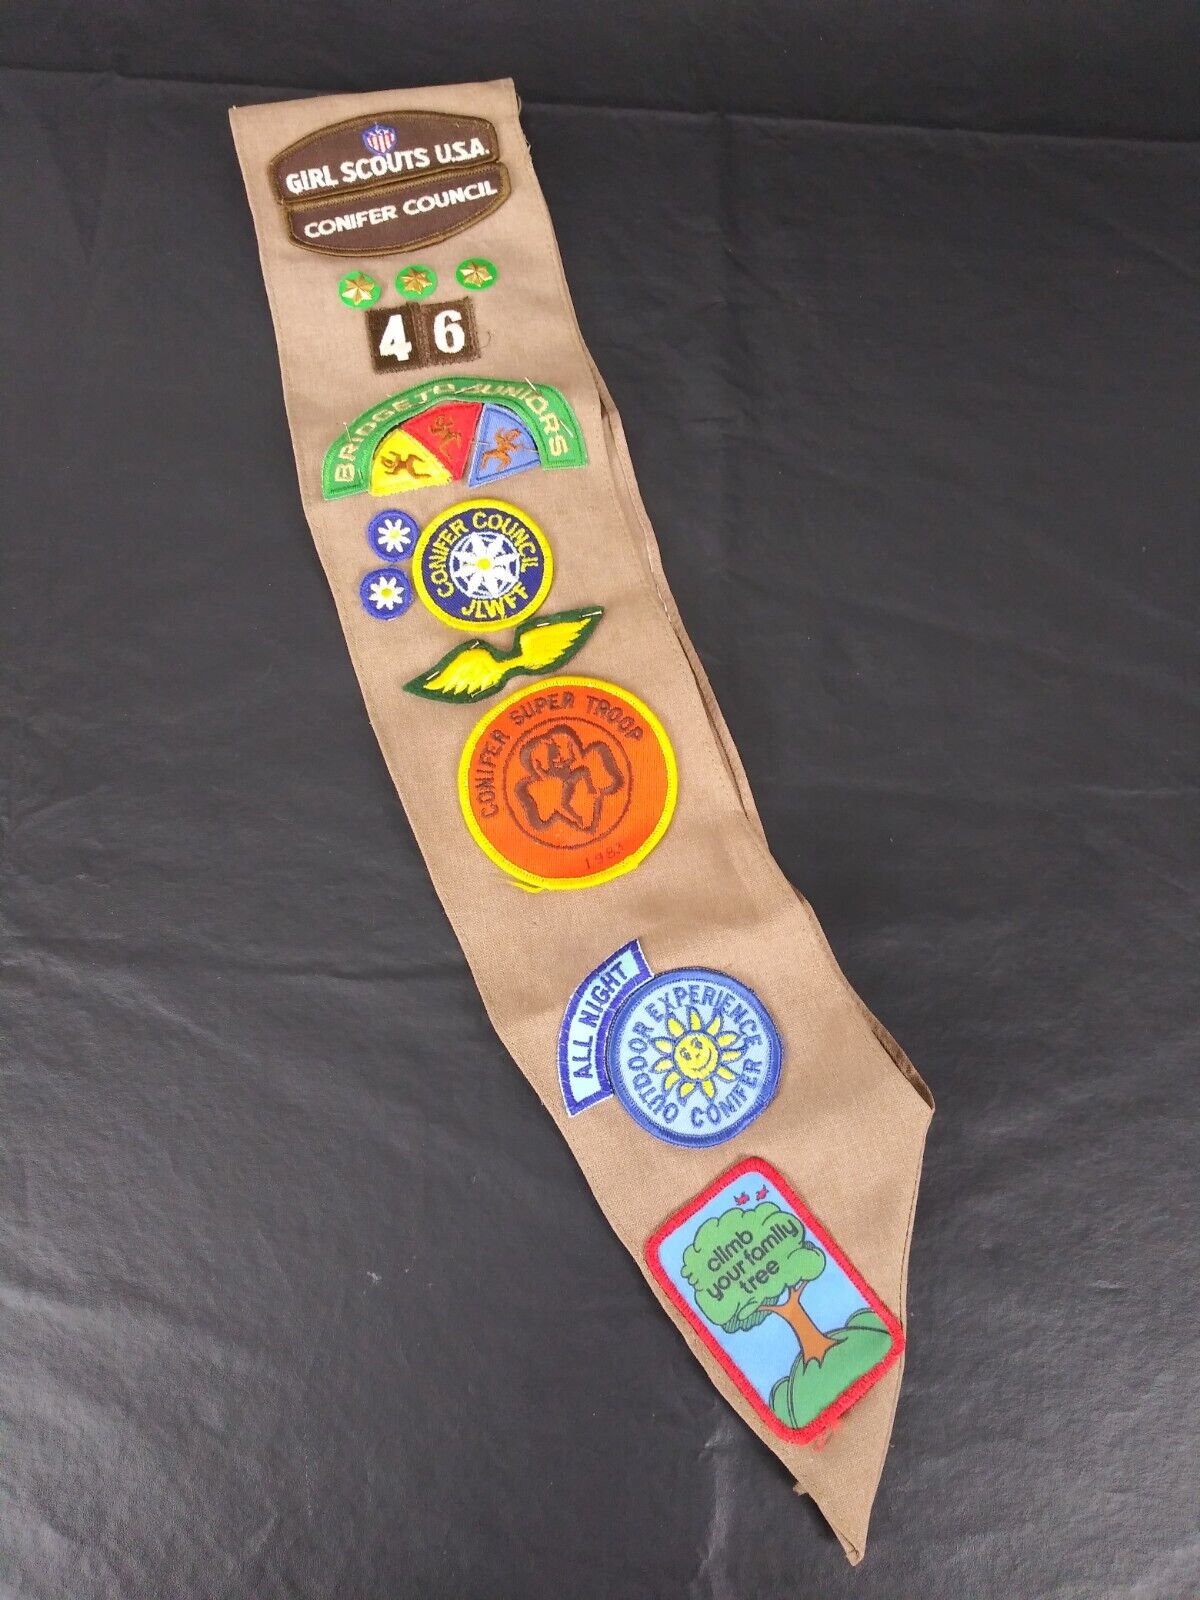 VTG 1983/84 Girl Scouts Brownie Sash Conifer Council WITH Patches Badges Pins